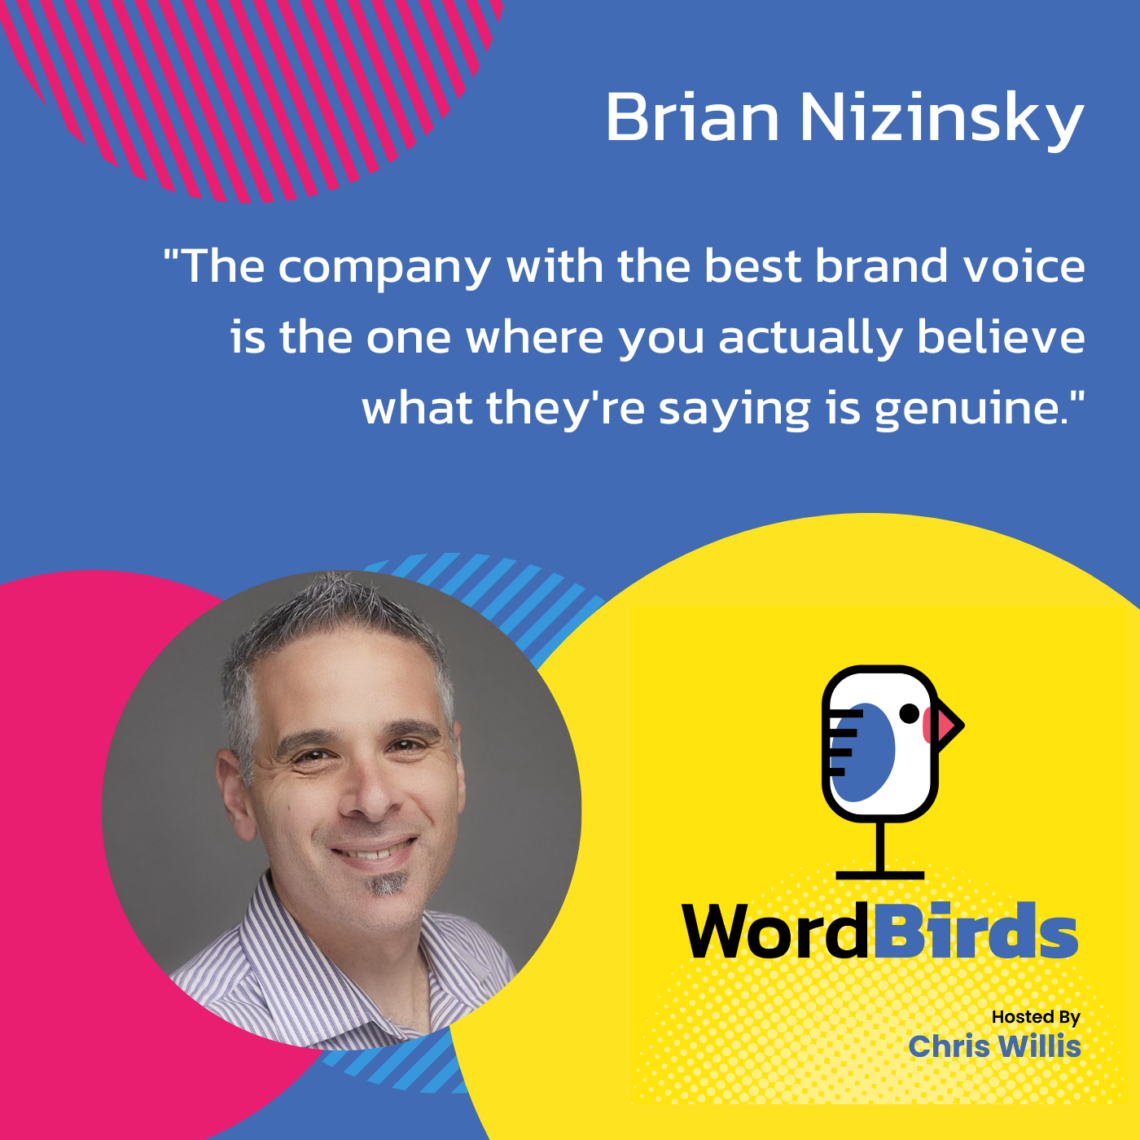 On a blue background, with a headshot of Brian Nizinsky in the lower left corner, a quote reads: "The company with the best brand voice is the one where you actually believe what they're saying is genuine."